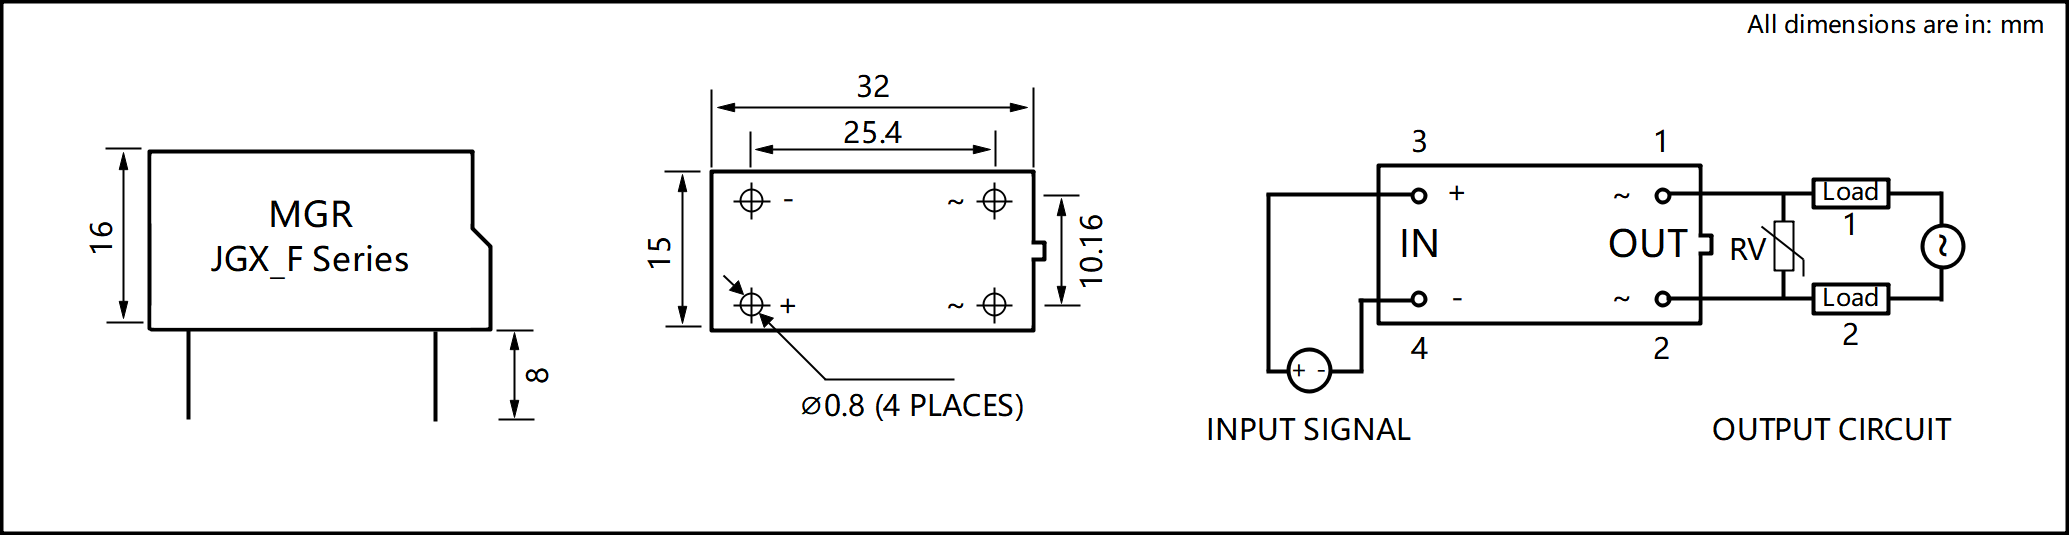 JGX_F Series Plastic Housing PCB Mount Solid State Relay Circuit Wring Diagram